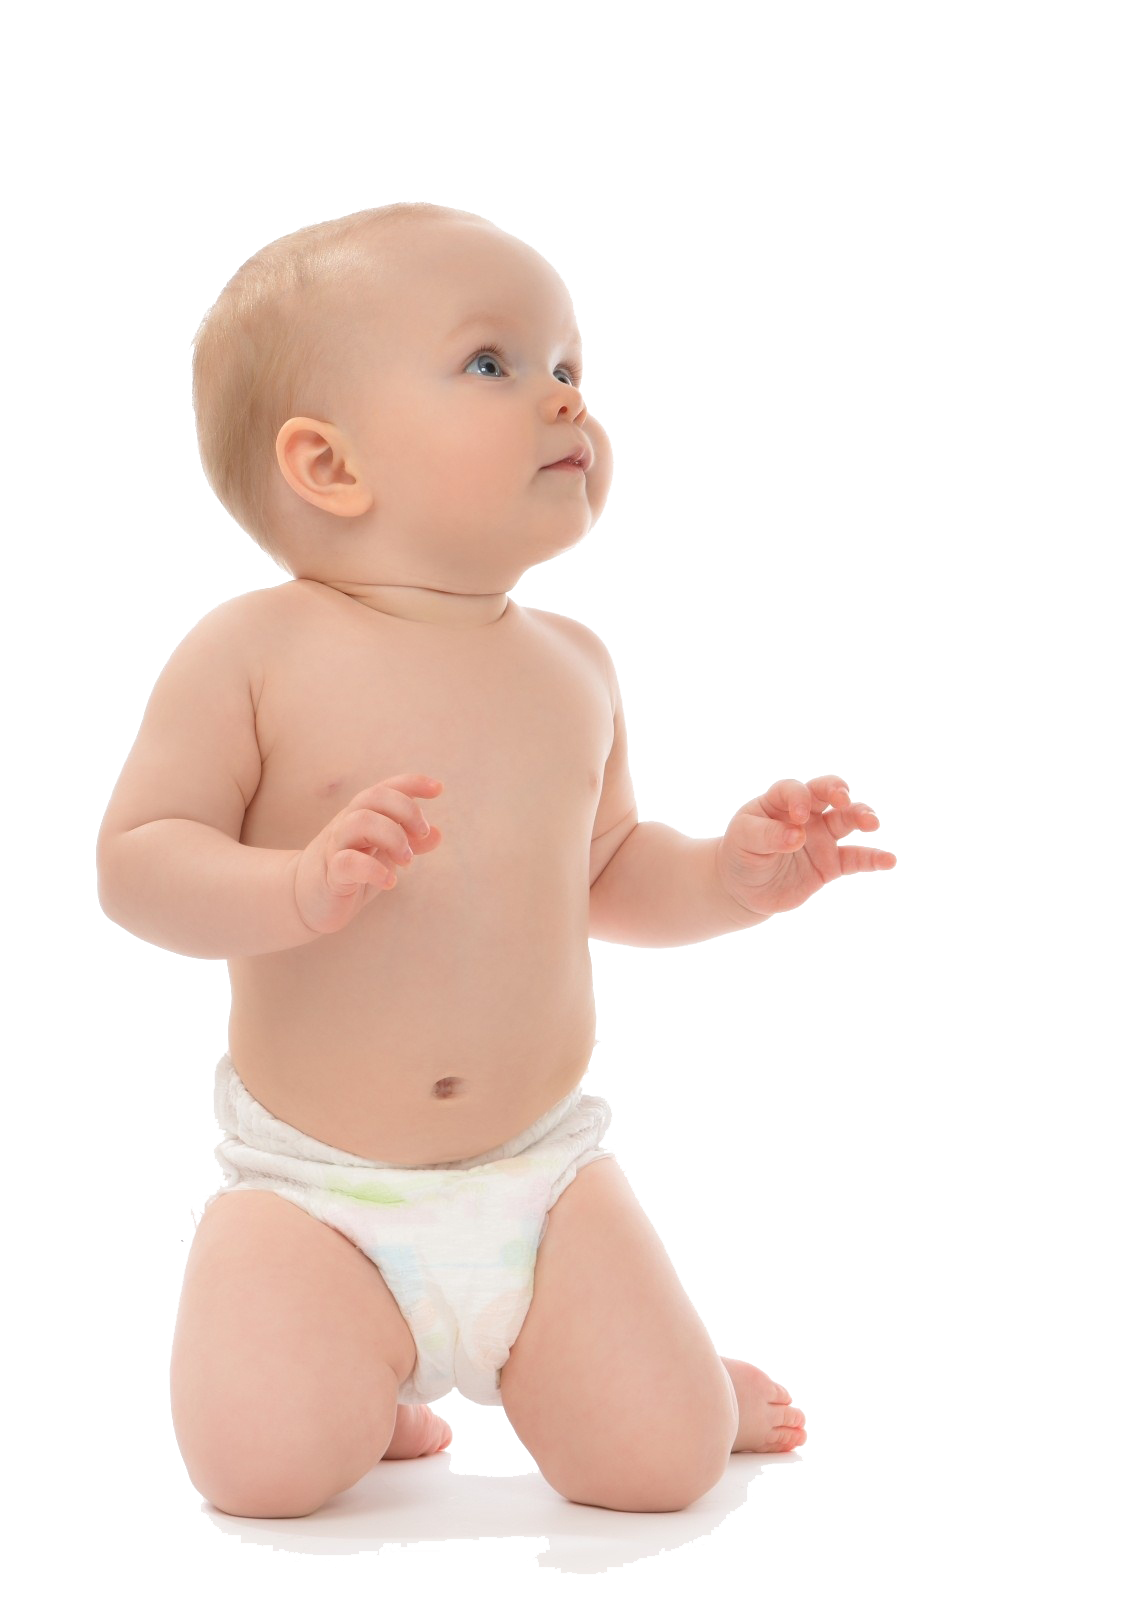 Little Baby Boy Free Download PNG Image